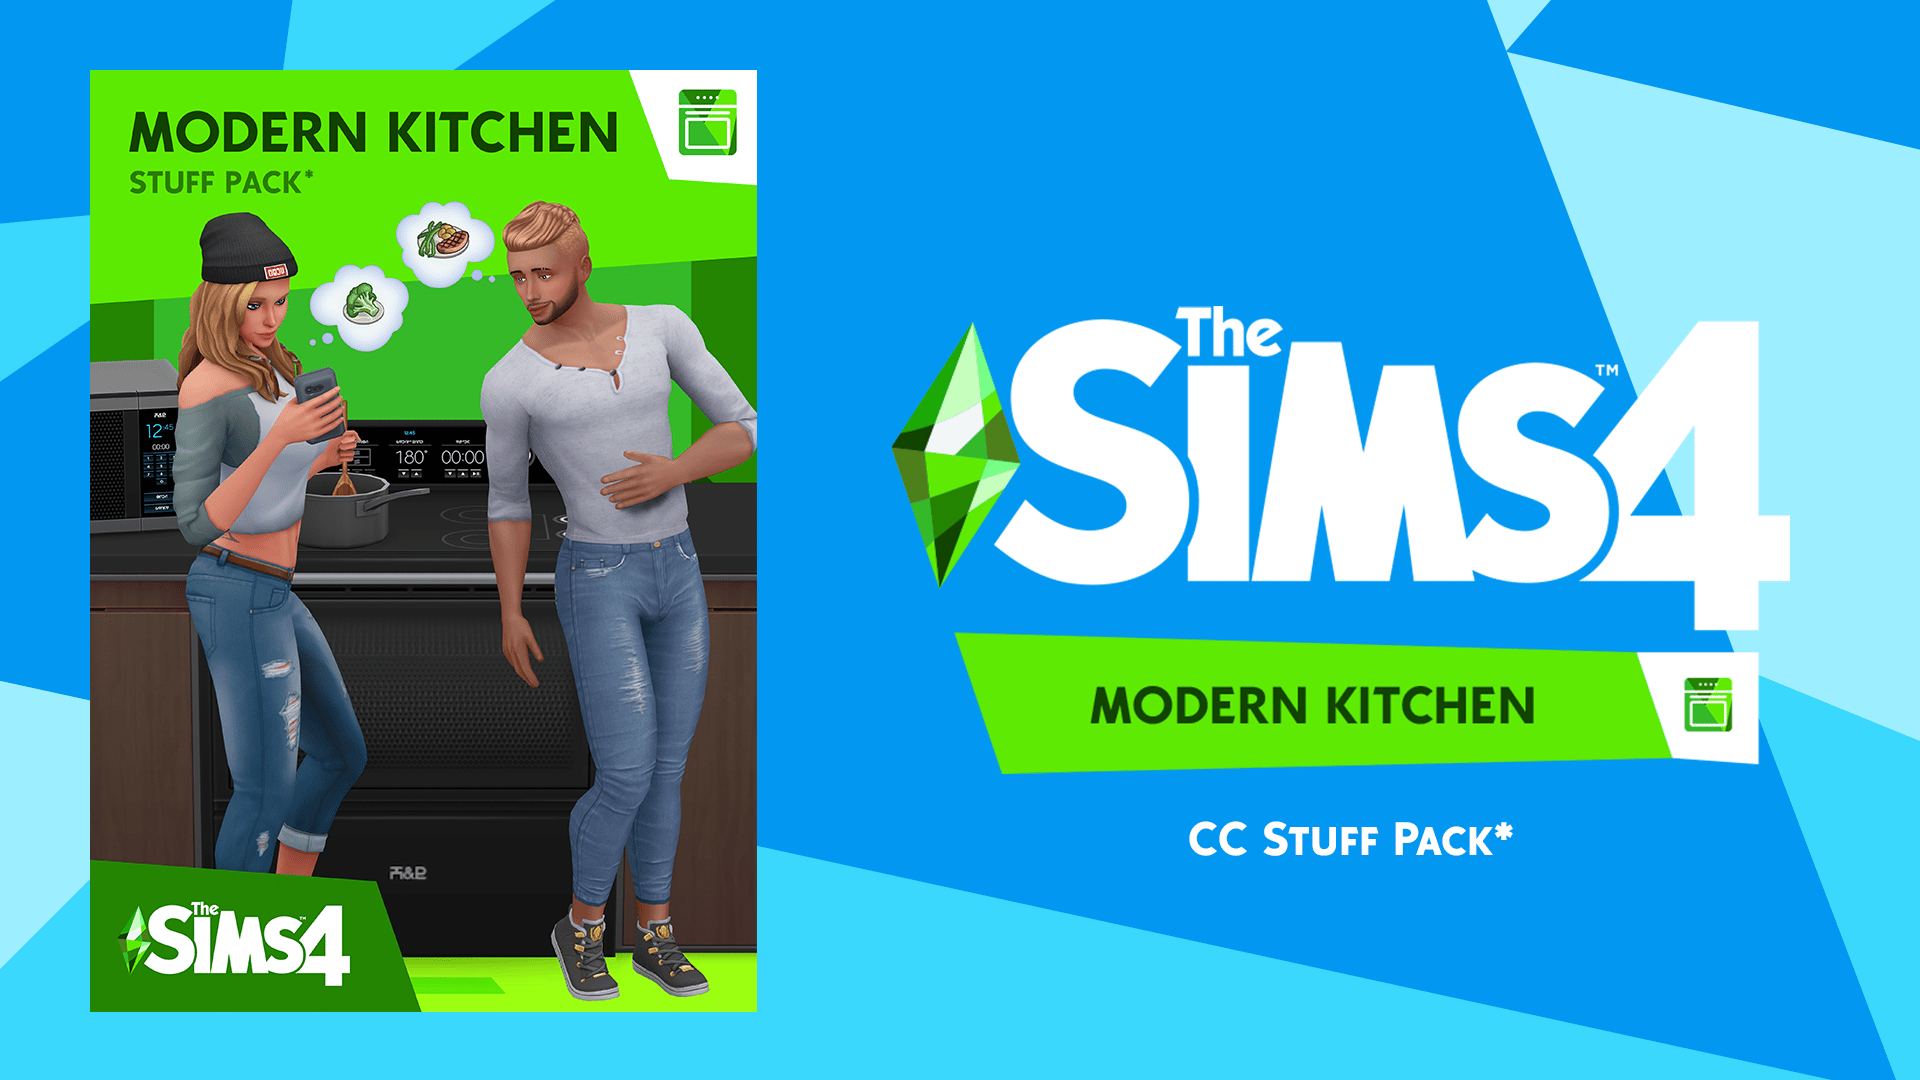 The Modern Kitchen pack includes a lot of new additions